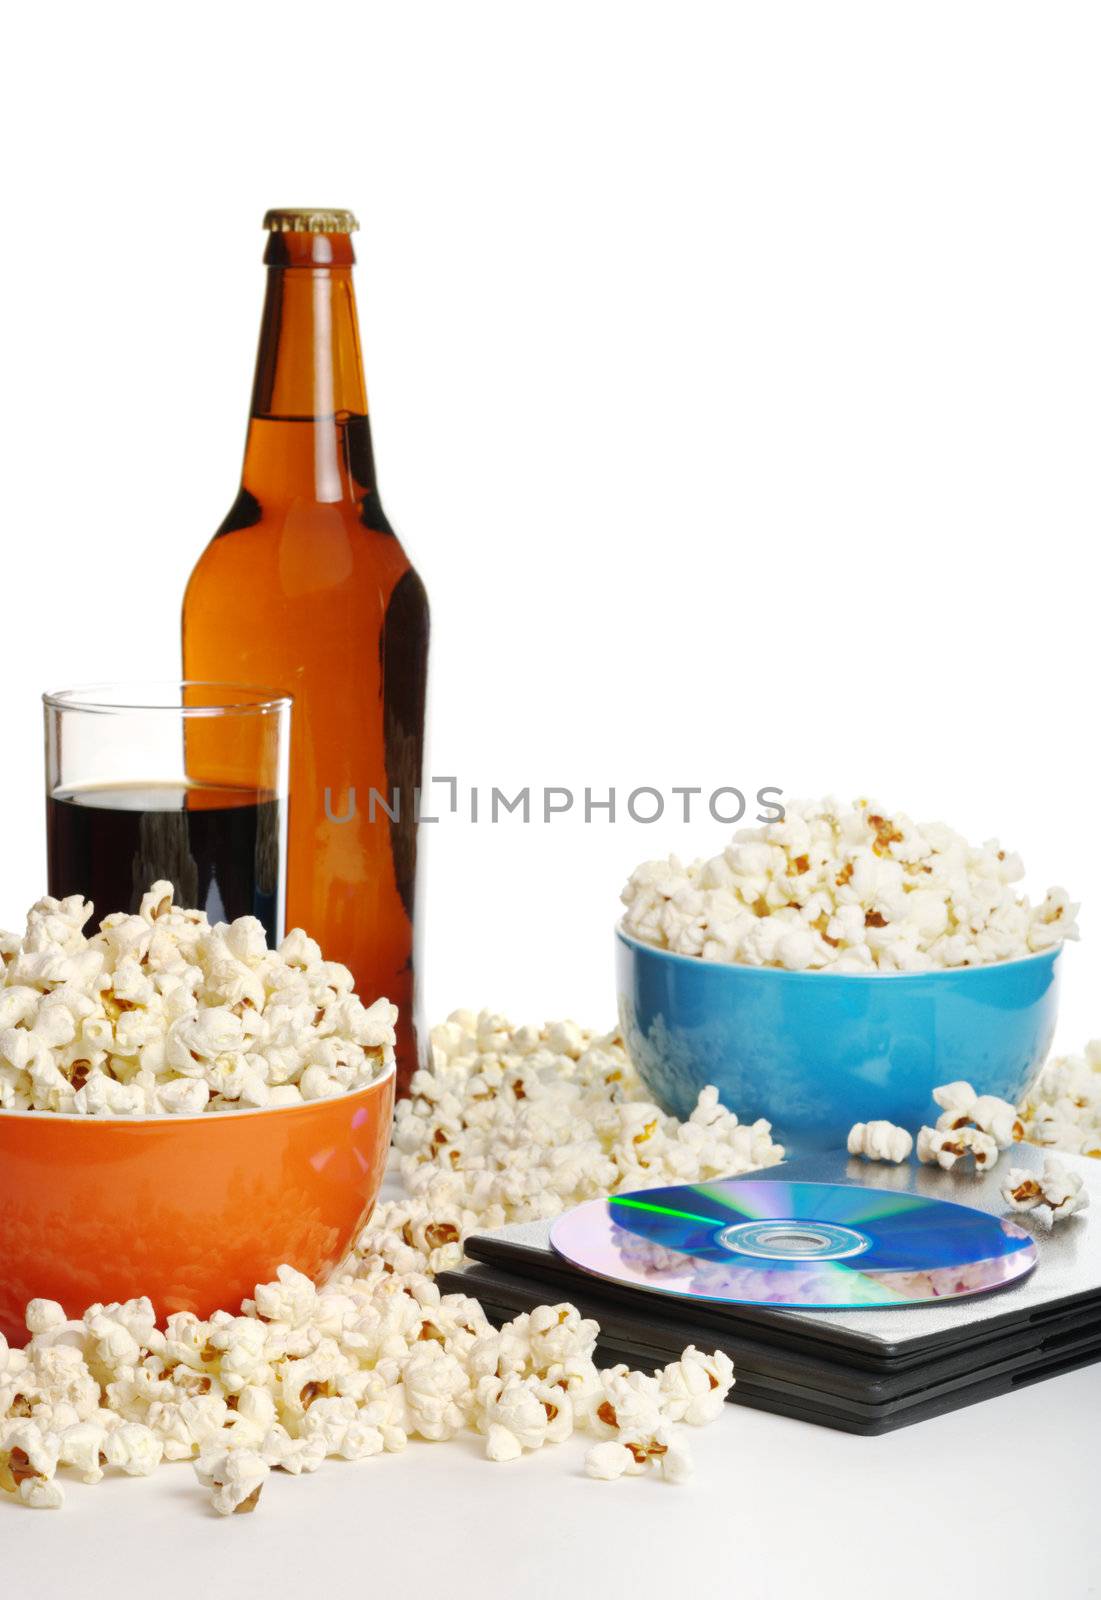 Movie night at home: Popcorn, softdrink, beer and DVD